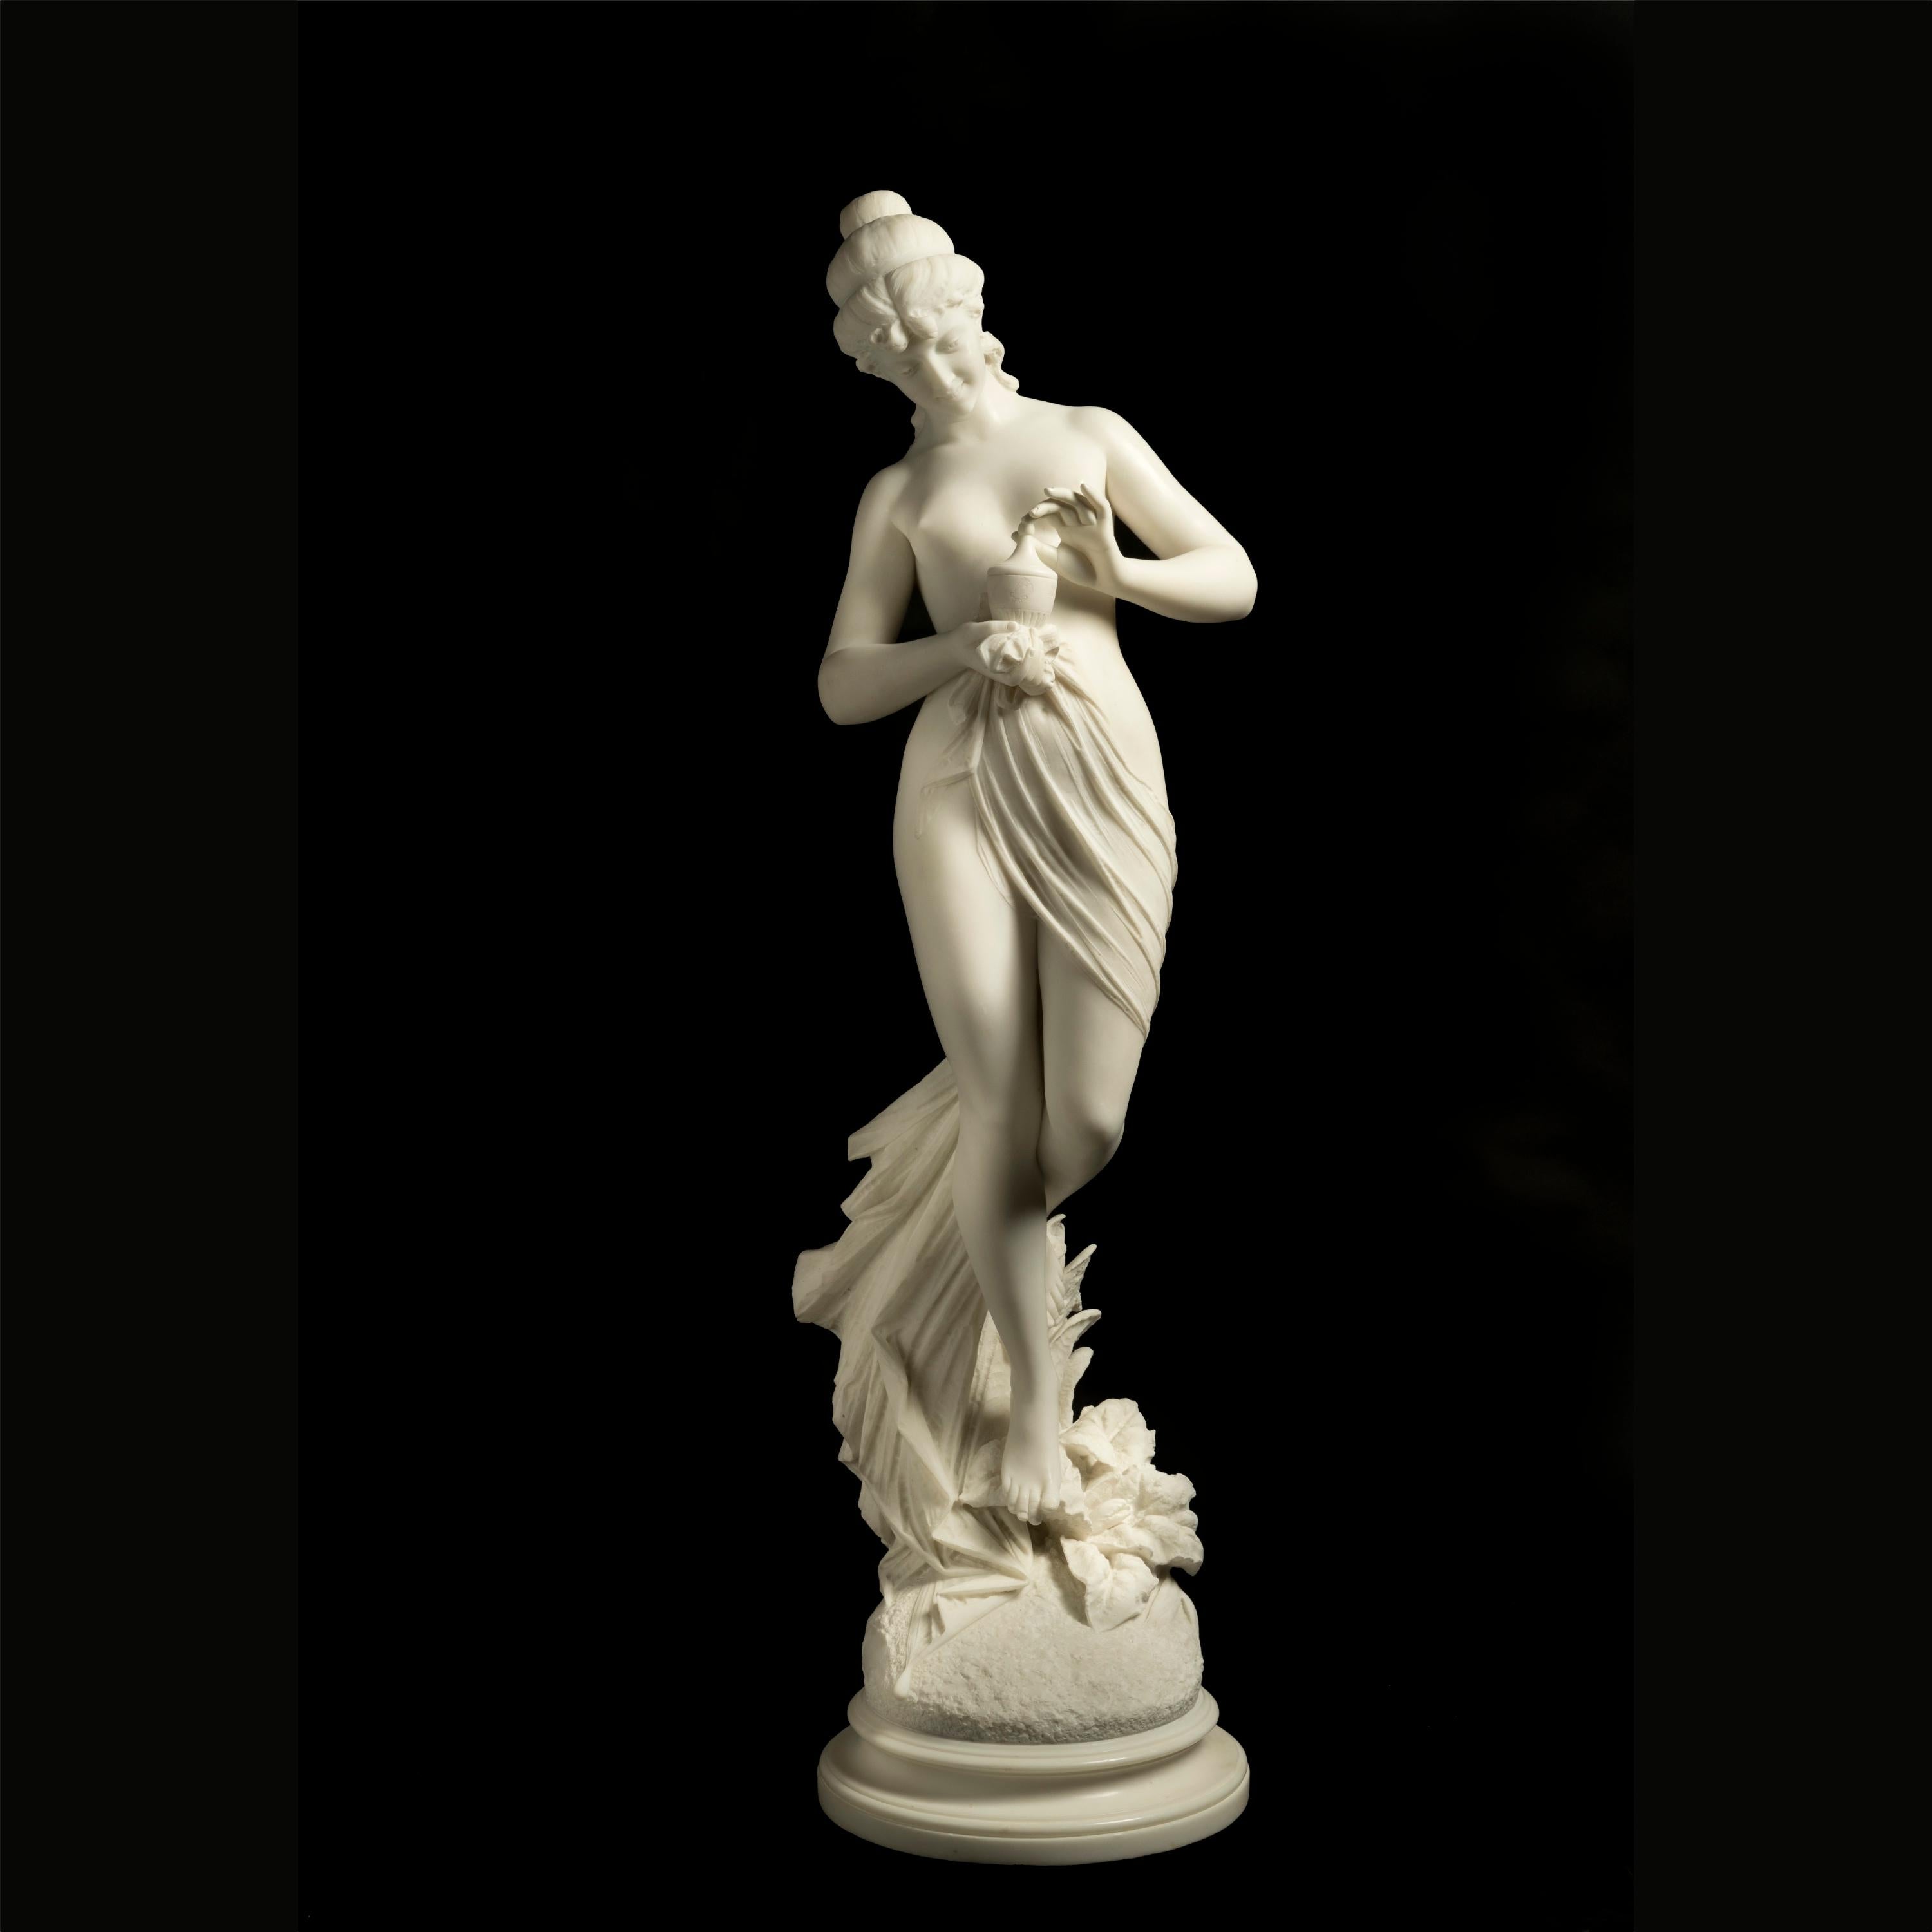 Pandora
By Ferdinando Andreini

Carved from statuary marble with great virtuosity, representing the mythological figure of Pandora, draped in a single flowing garb as she gazes at the small, lidded vase in her hands, a moment frozen in time as she